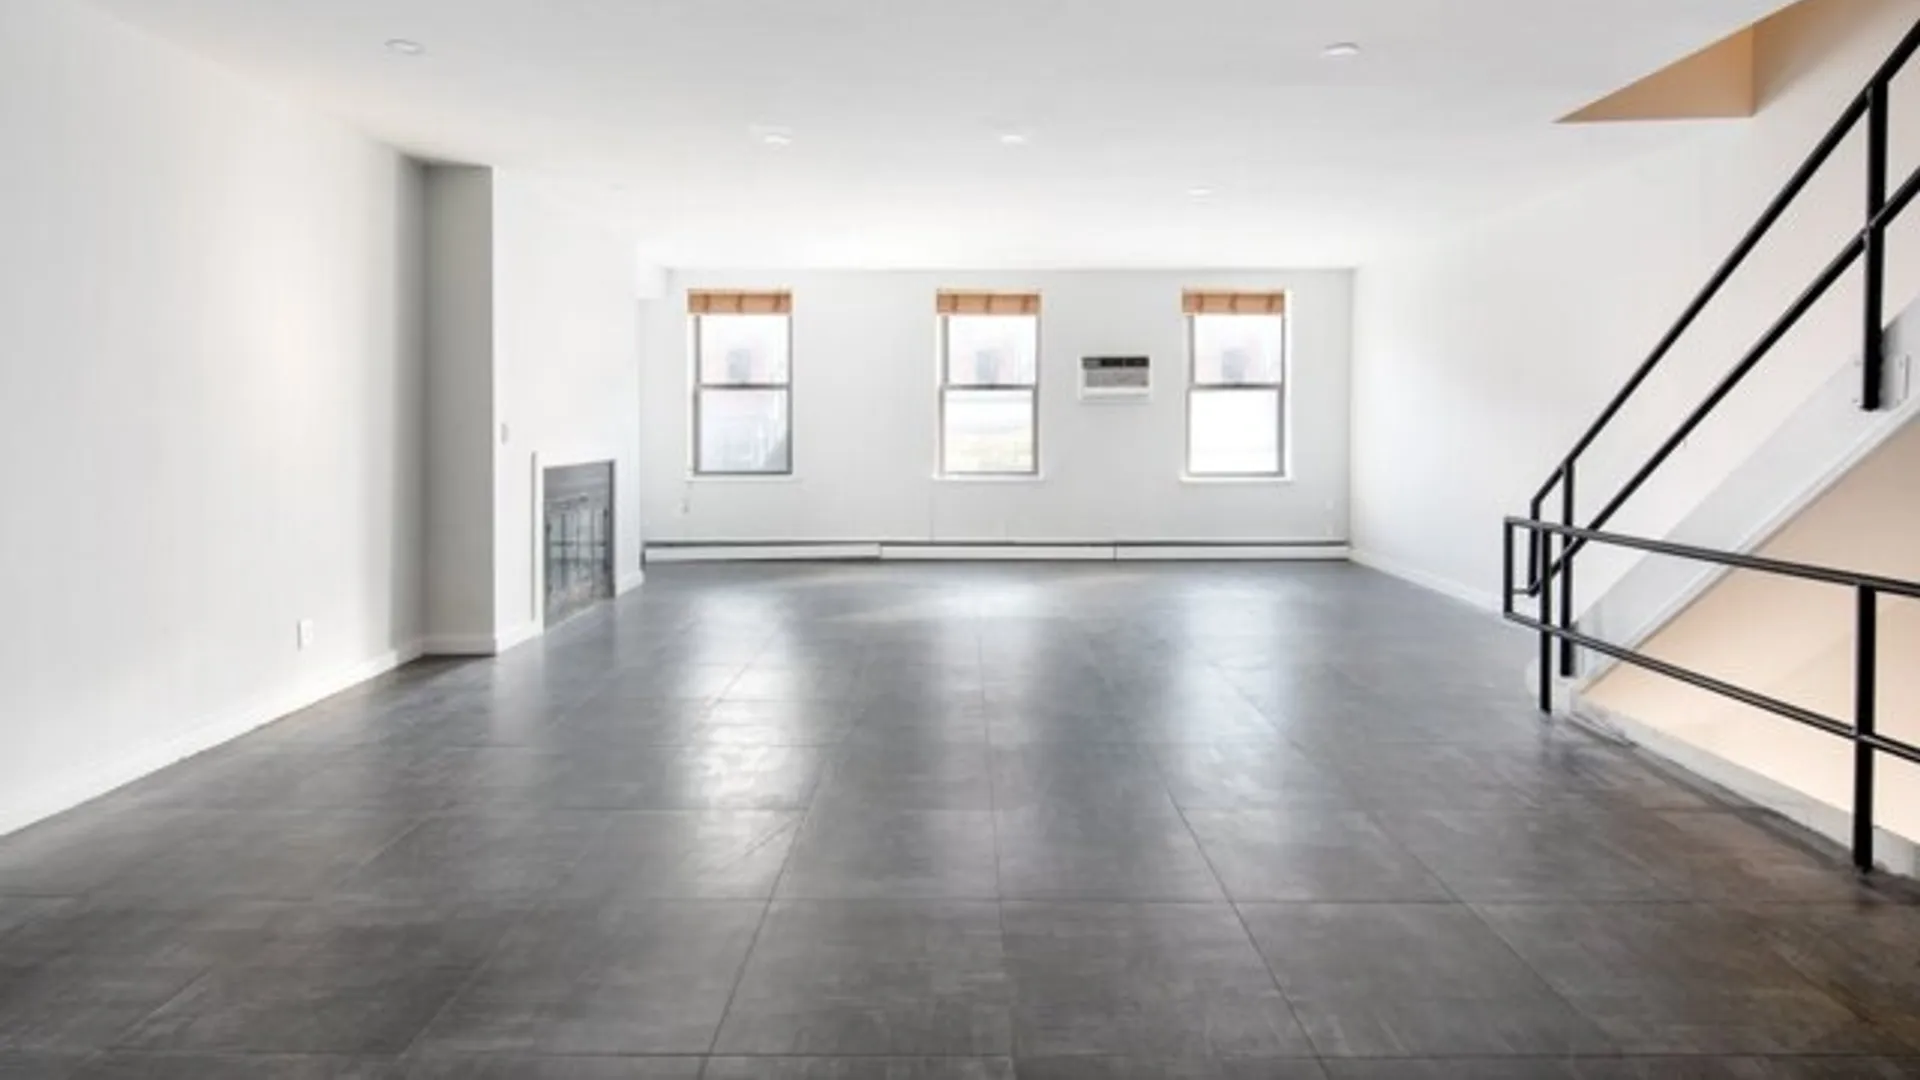 169 1st Avenue, New York, NY 10003, USA | 3 bed house for rent